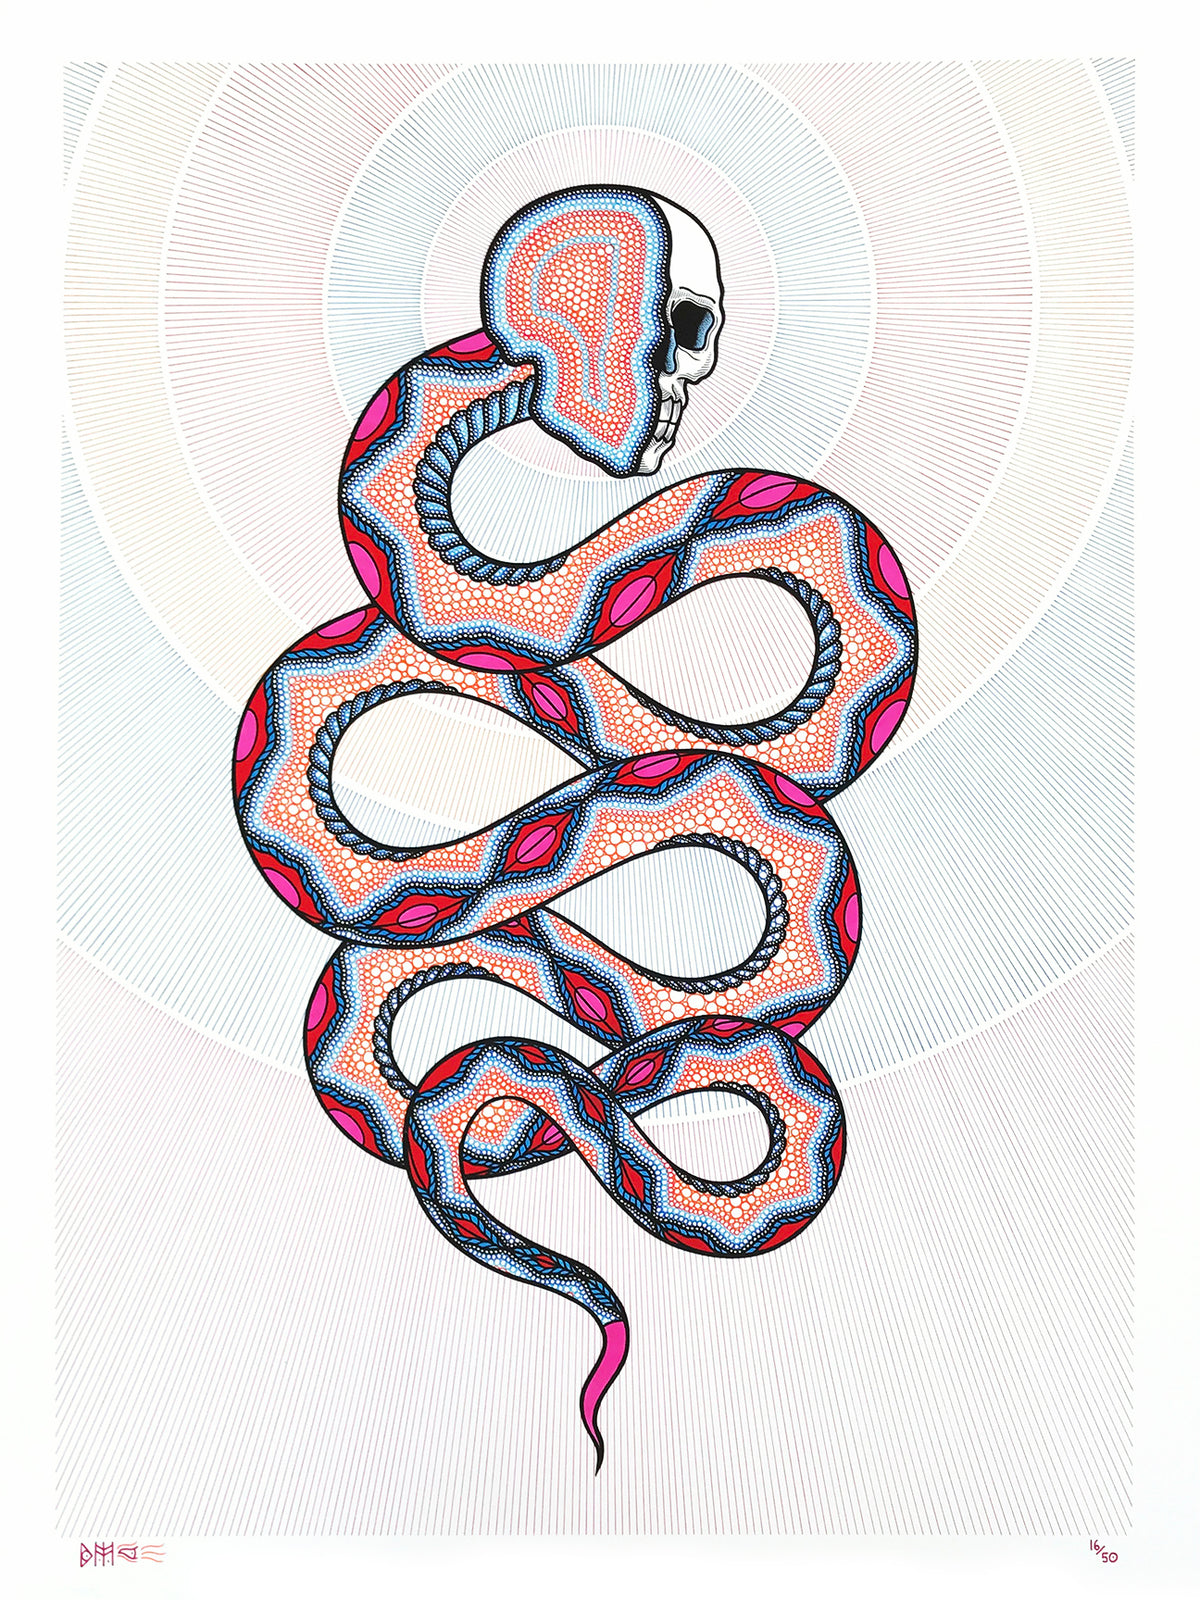 Bonethrower &quot;Cosmic Snake II&quot; - Archival Print, Limited Edition of 50 - 18 x 24&quot;